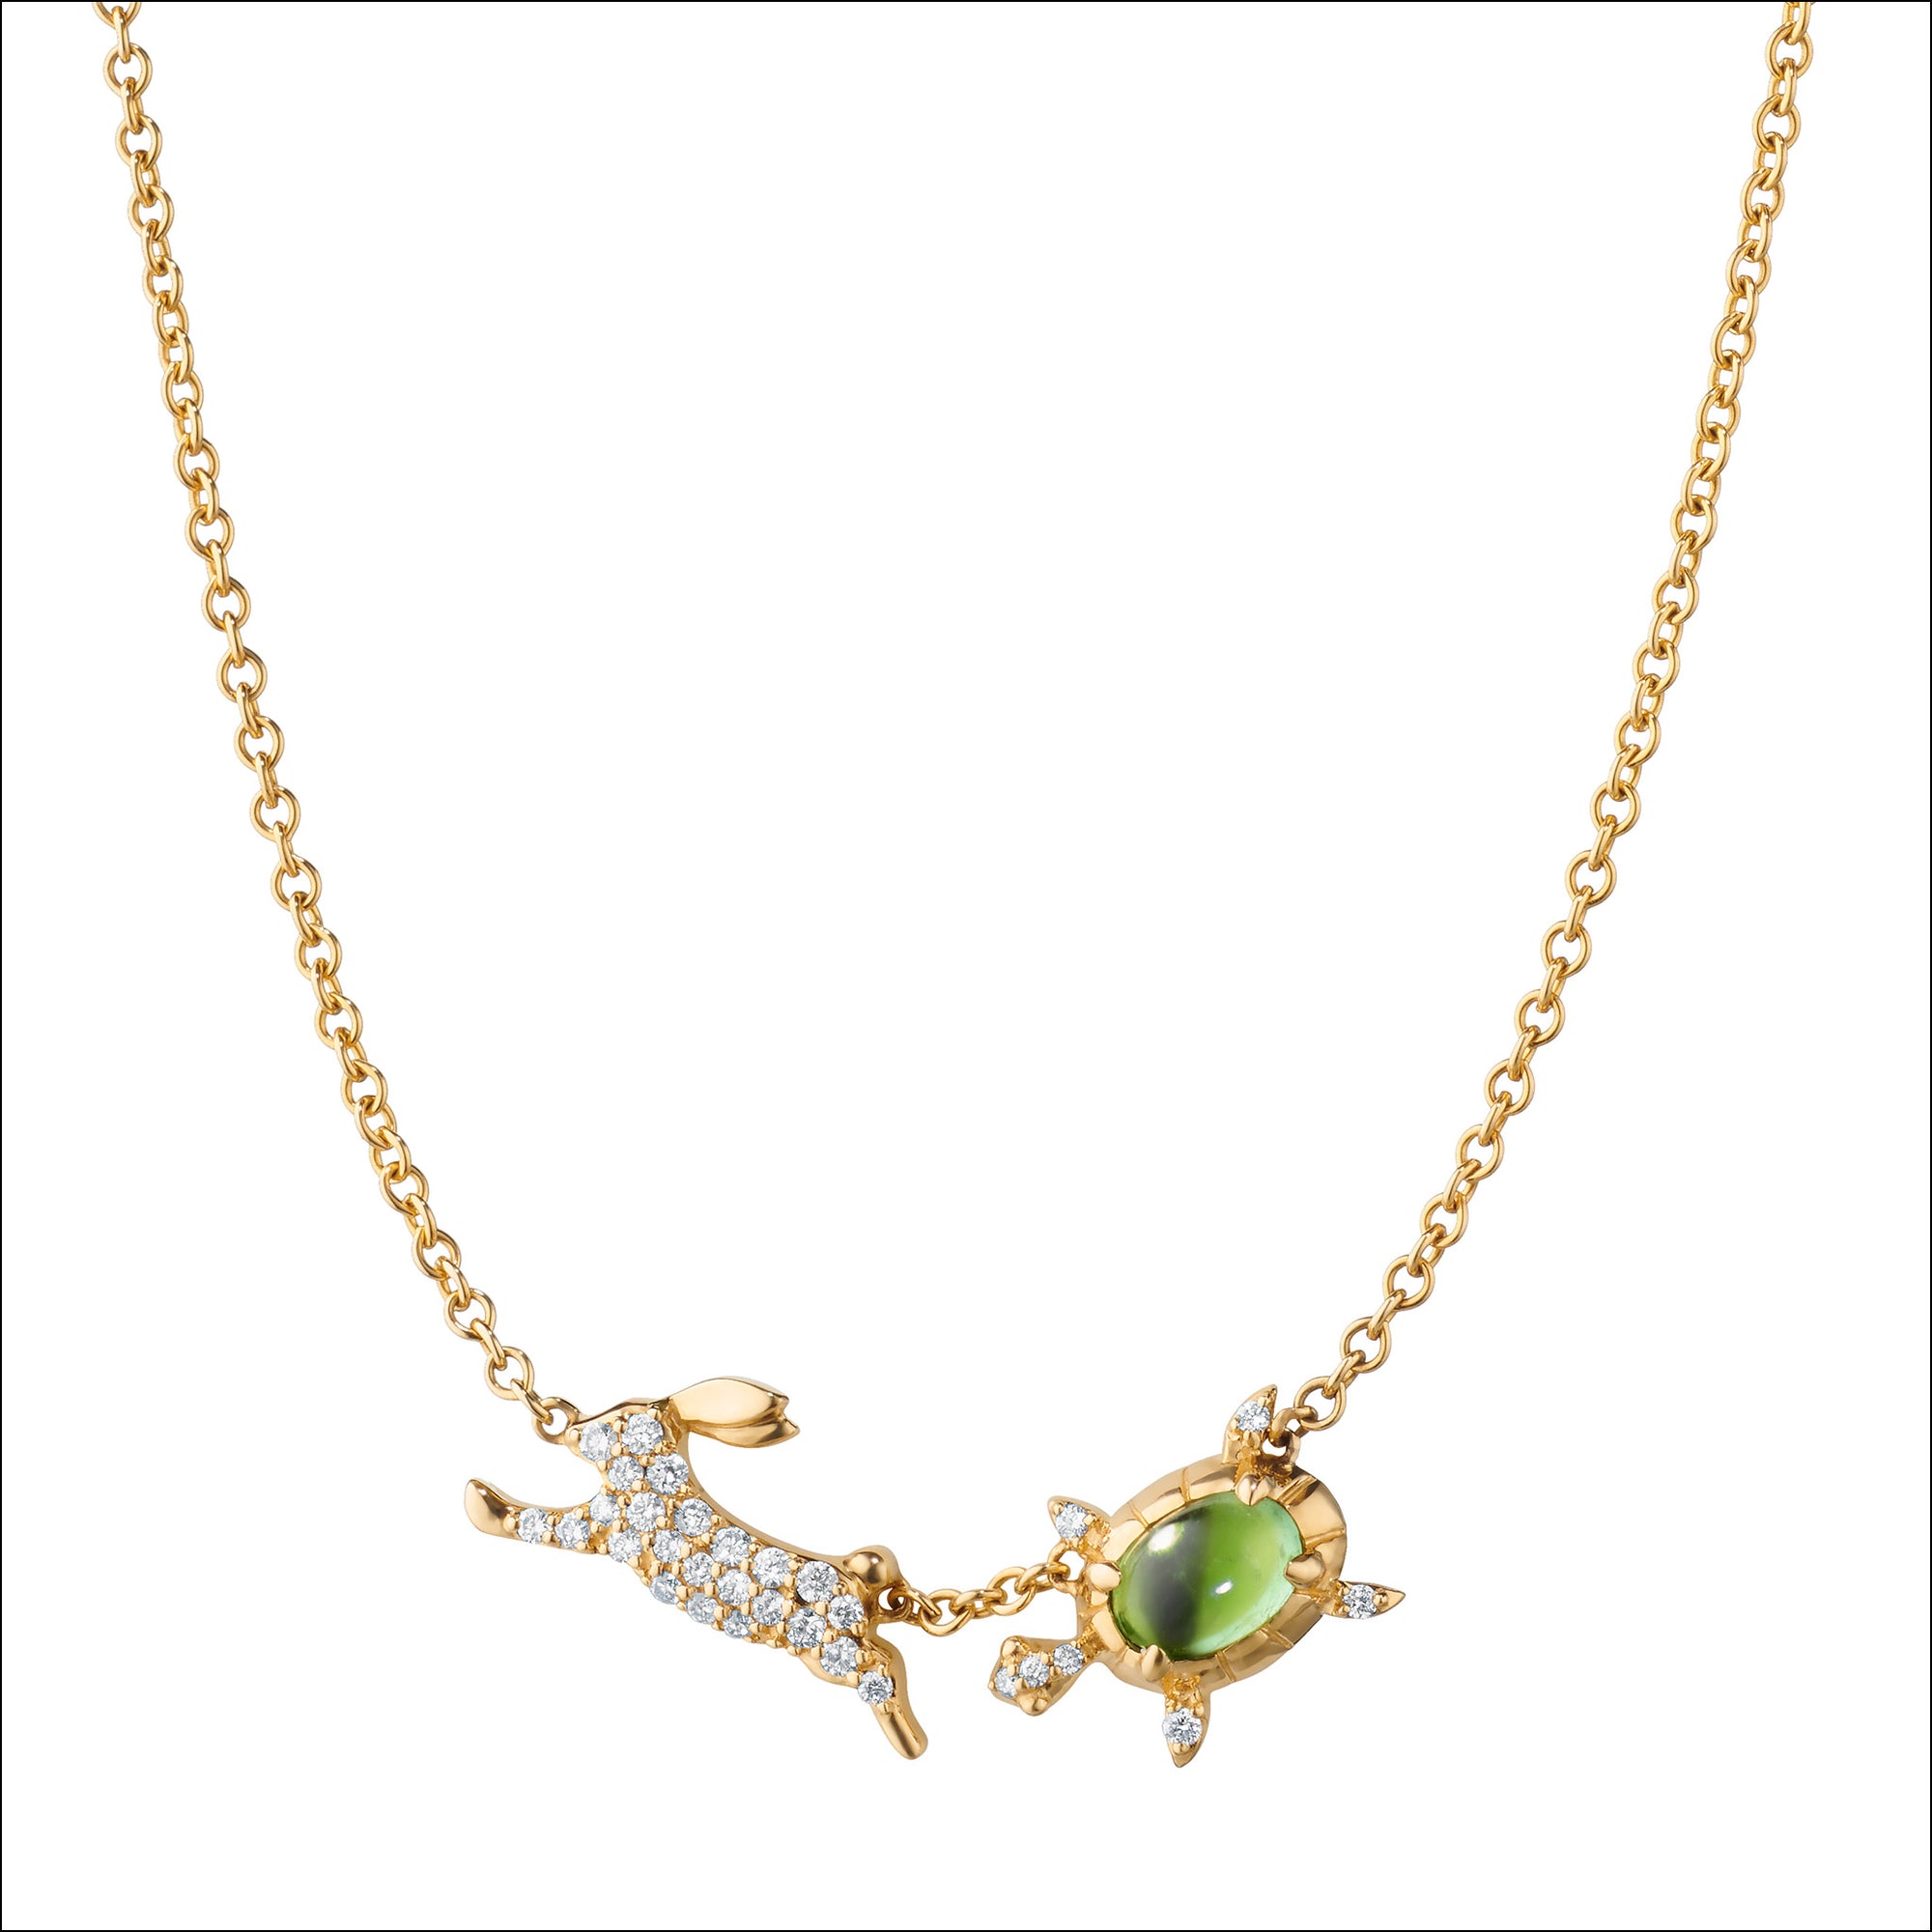 The Tortoise and the Hare Necklace